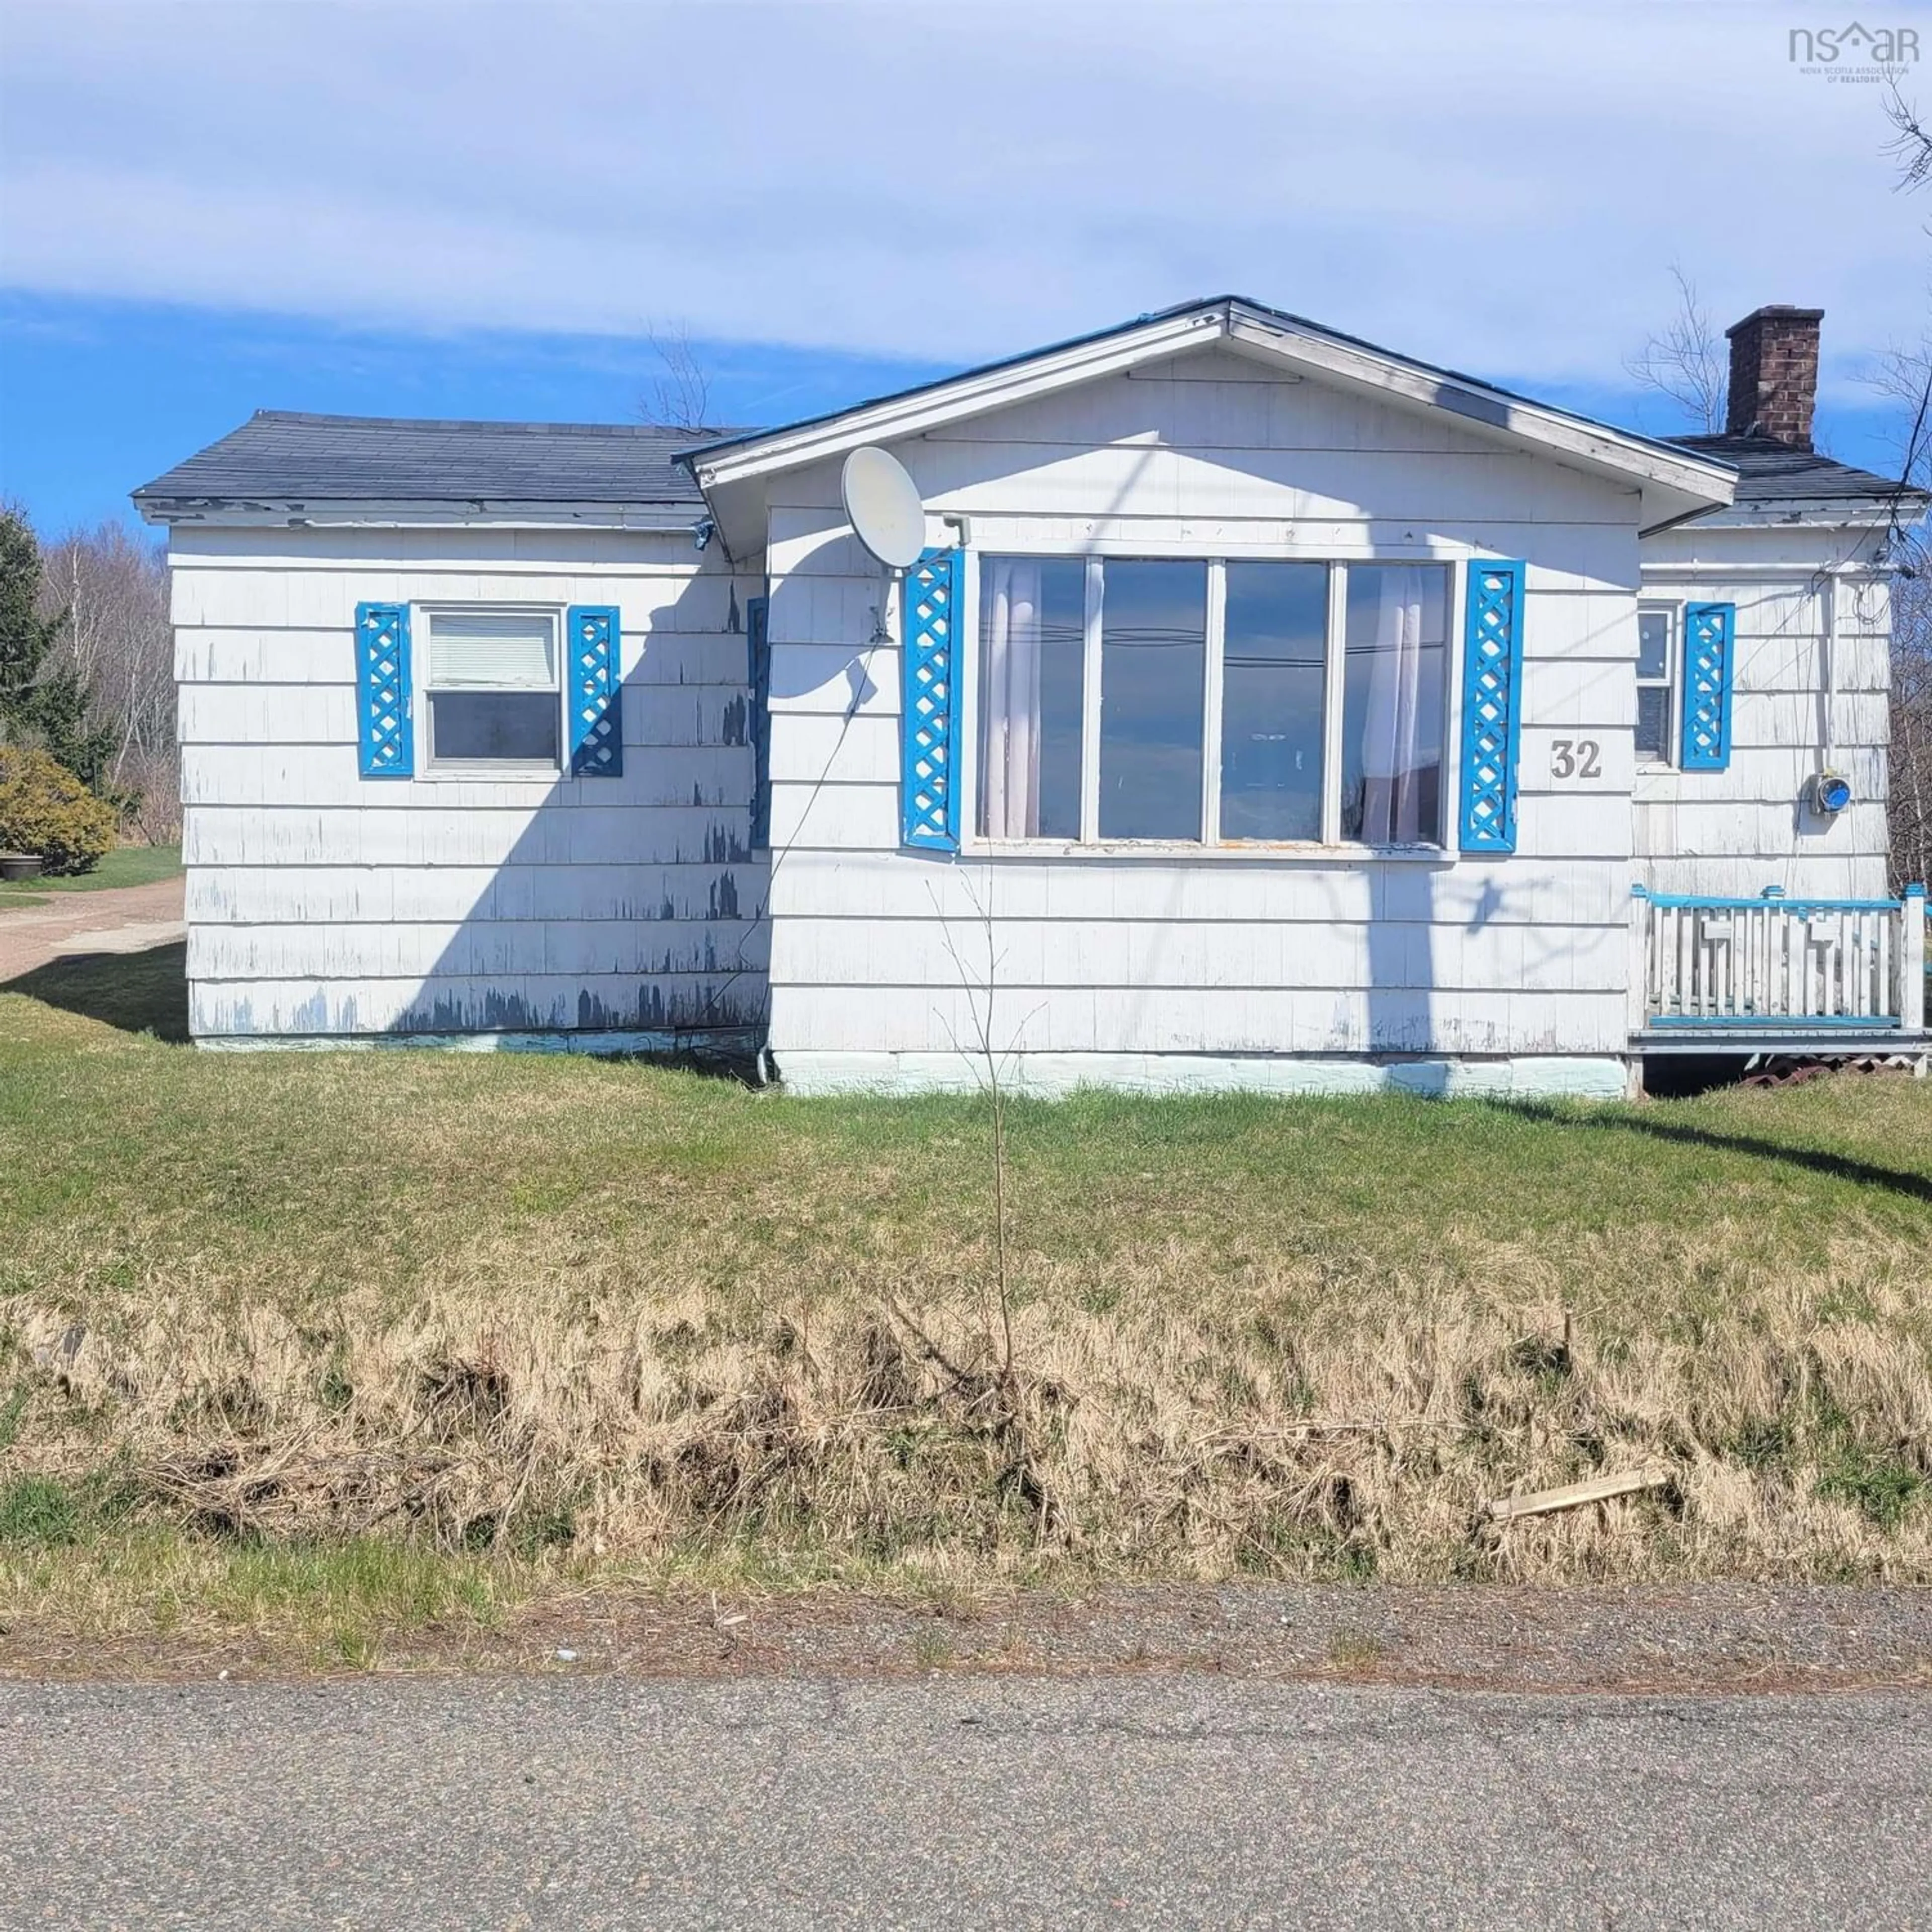 Frontside or backside of a home for 32 Lower Cove Rd, Joggins Nova Scotia B0L 1A0